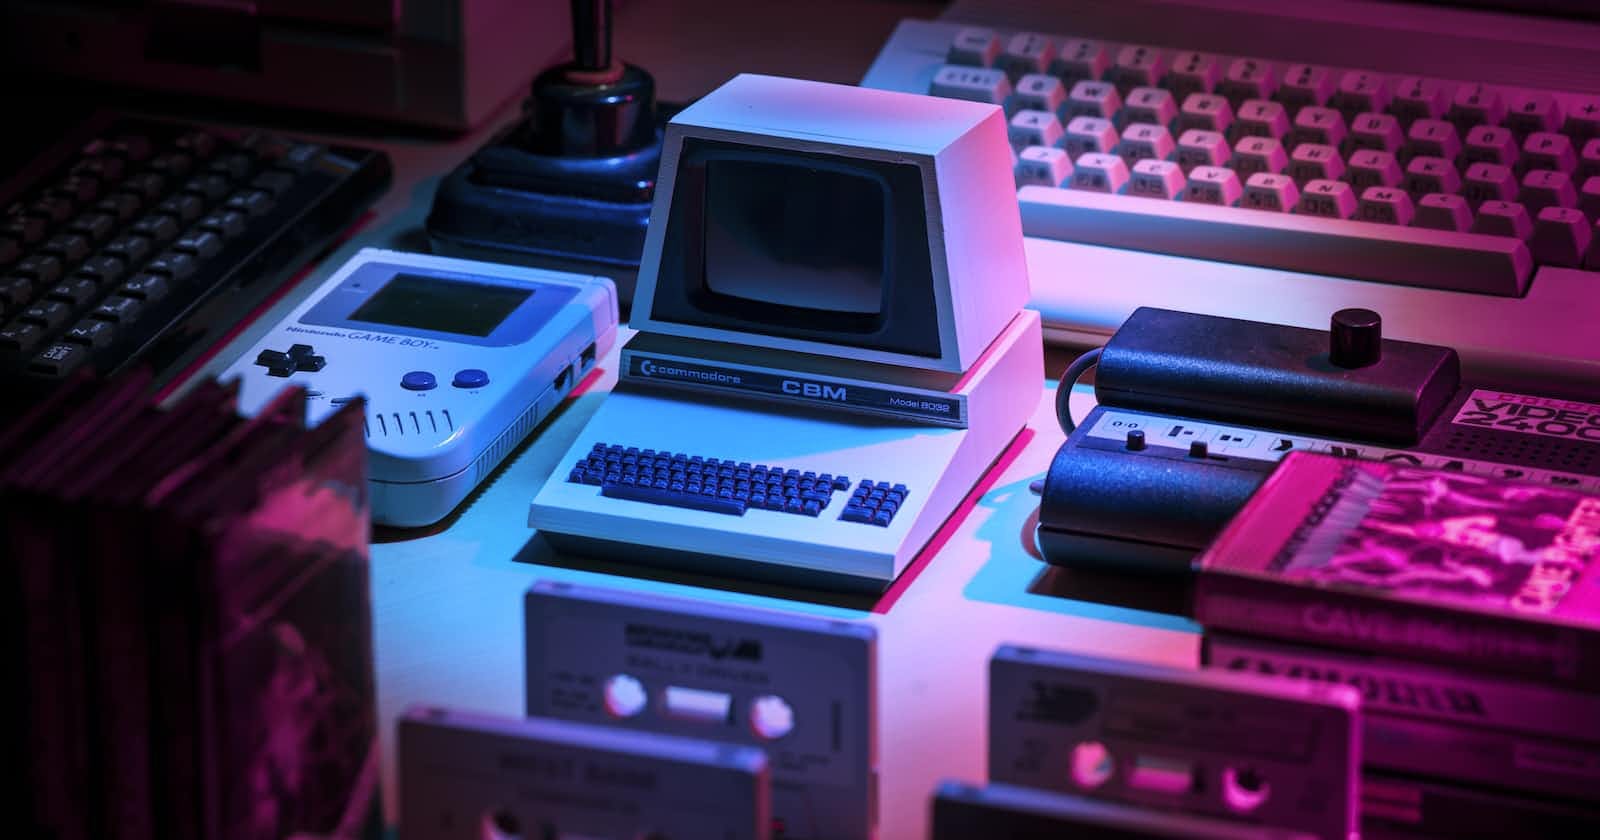 Dev Retro 2022: Reflections on Being a Developer in 2022